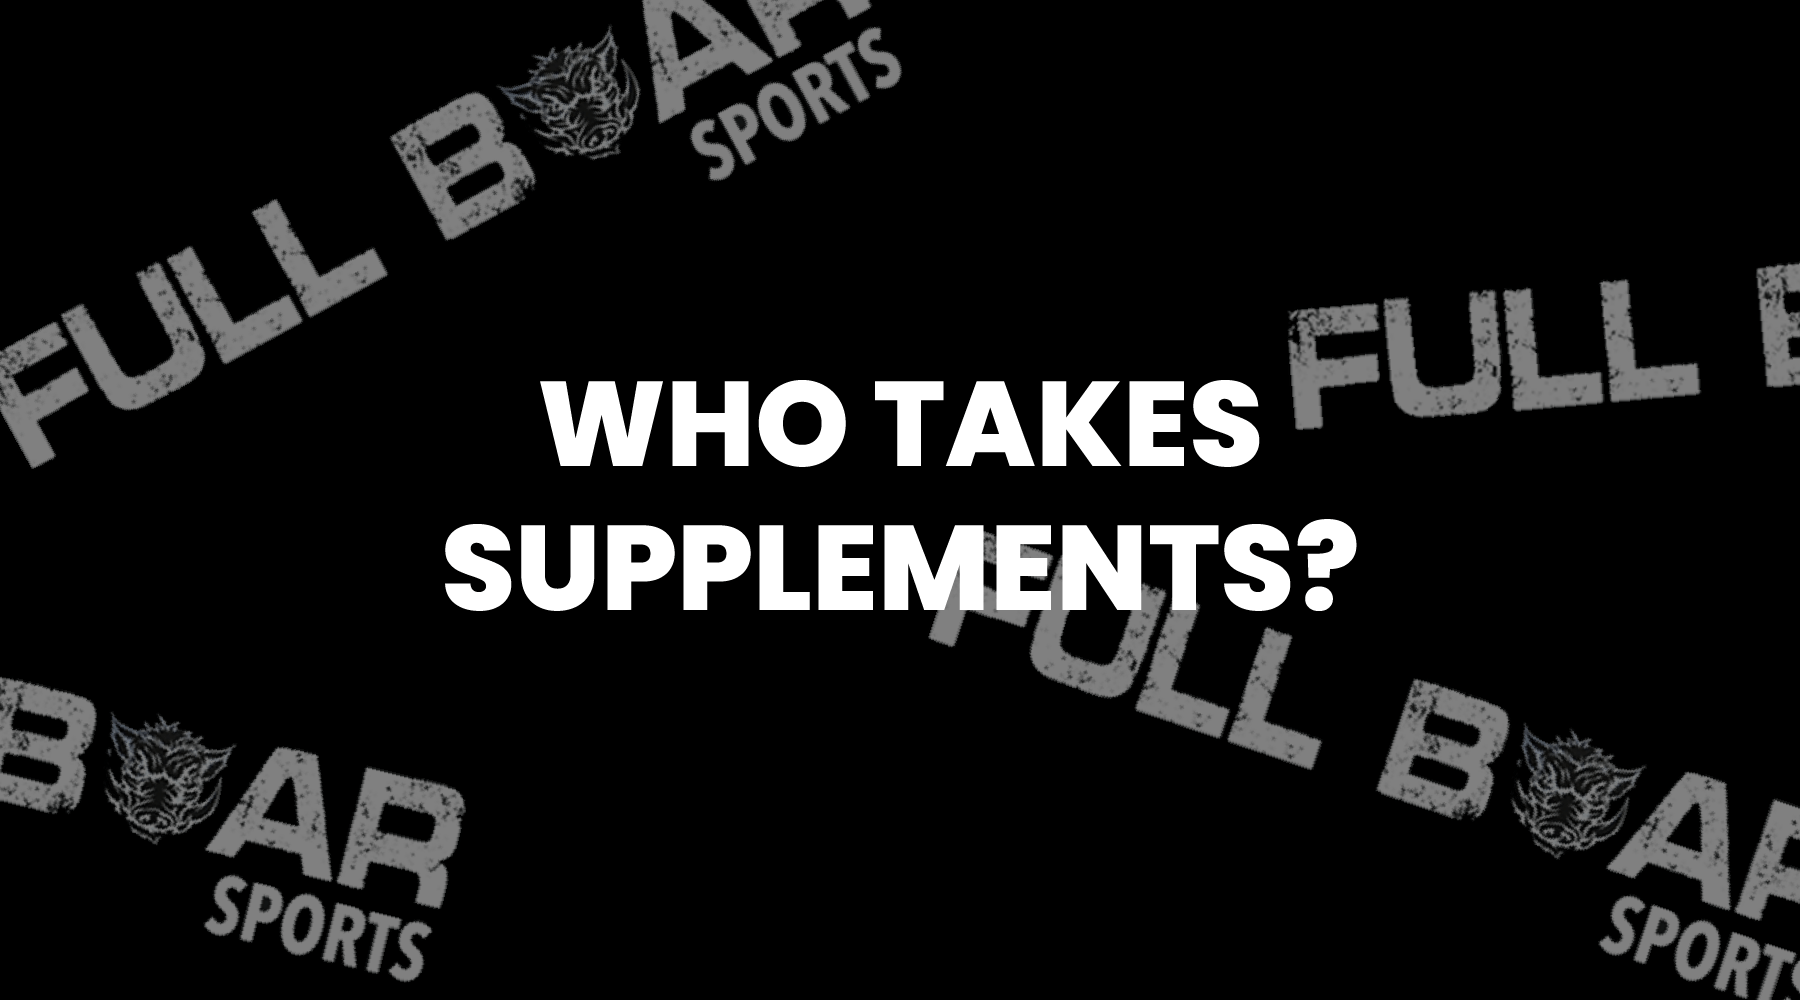 Who takes supplements? - Full Boar Sports